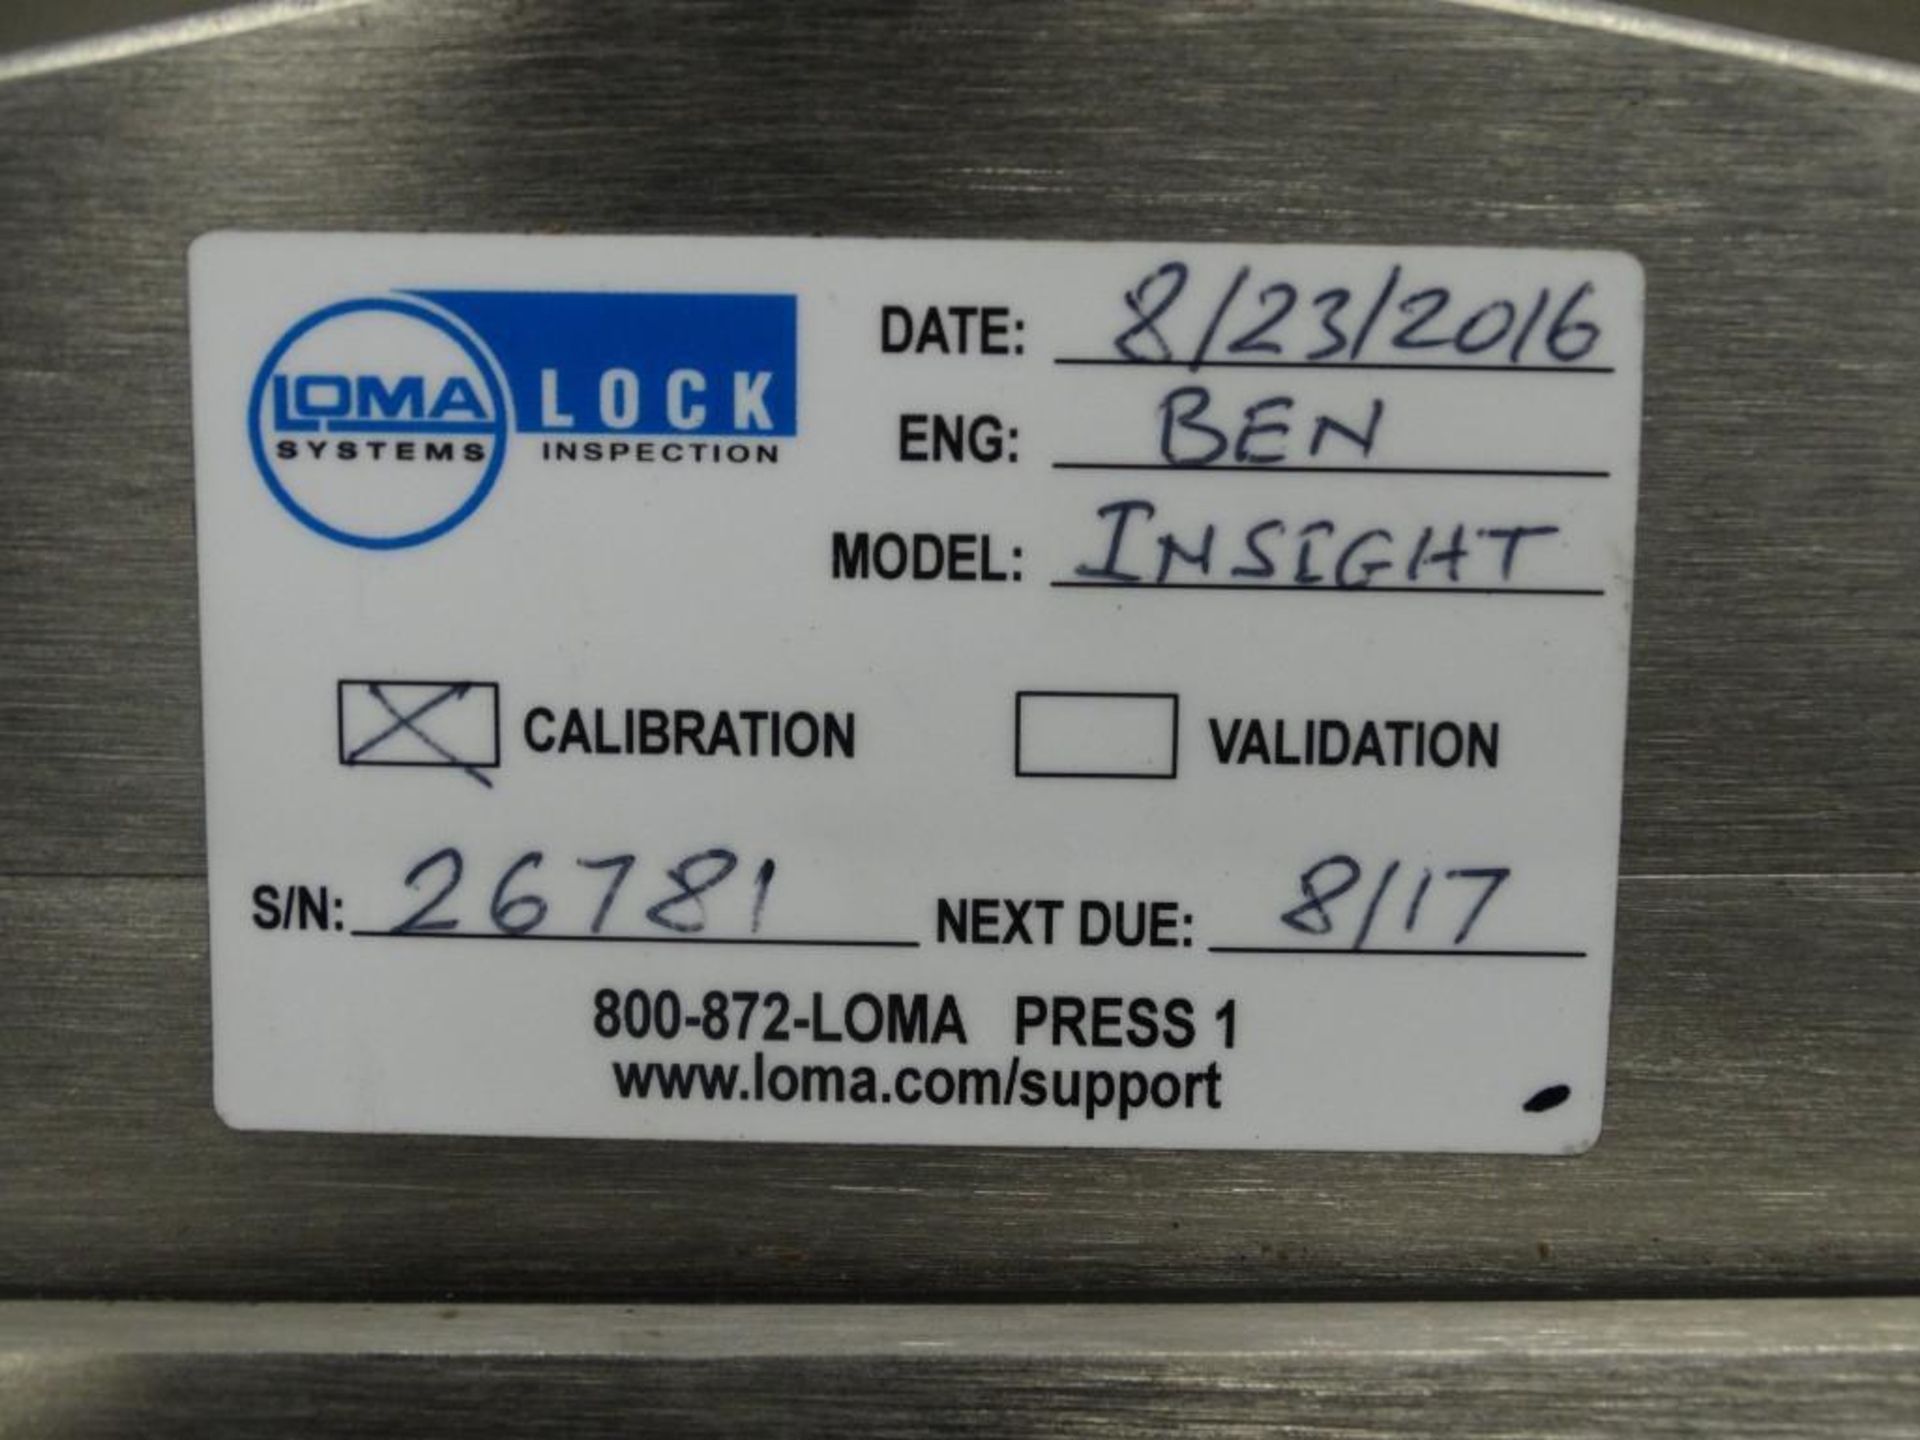 Loma Systems Lock Insight 10" x 4" Metal Detector - Image 5 of 6